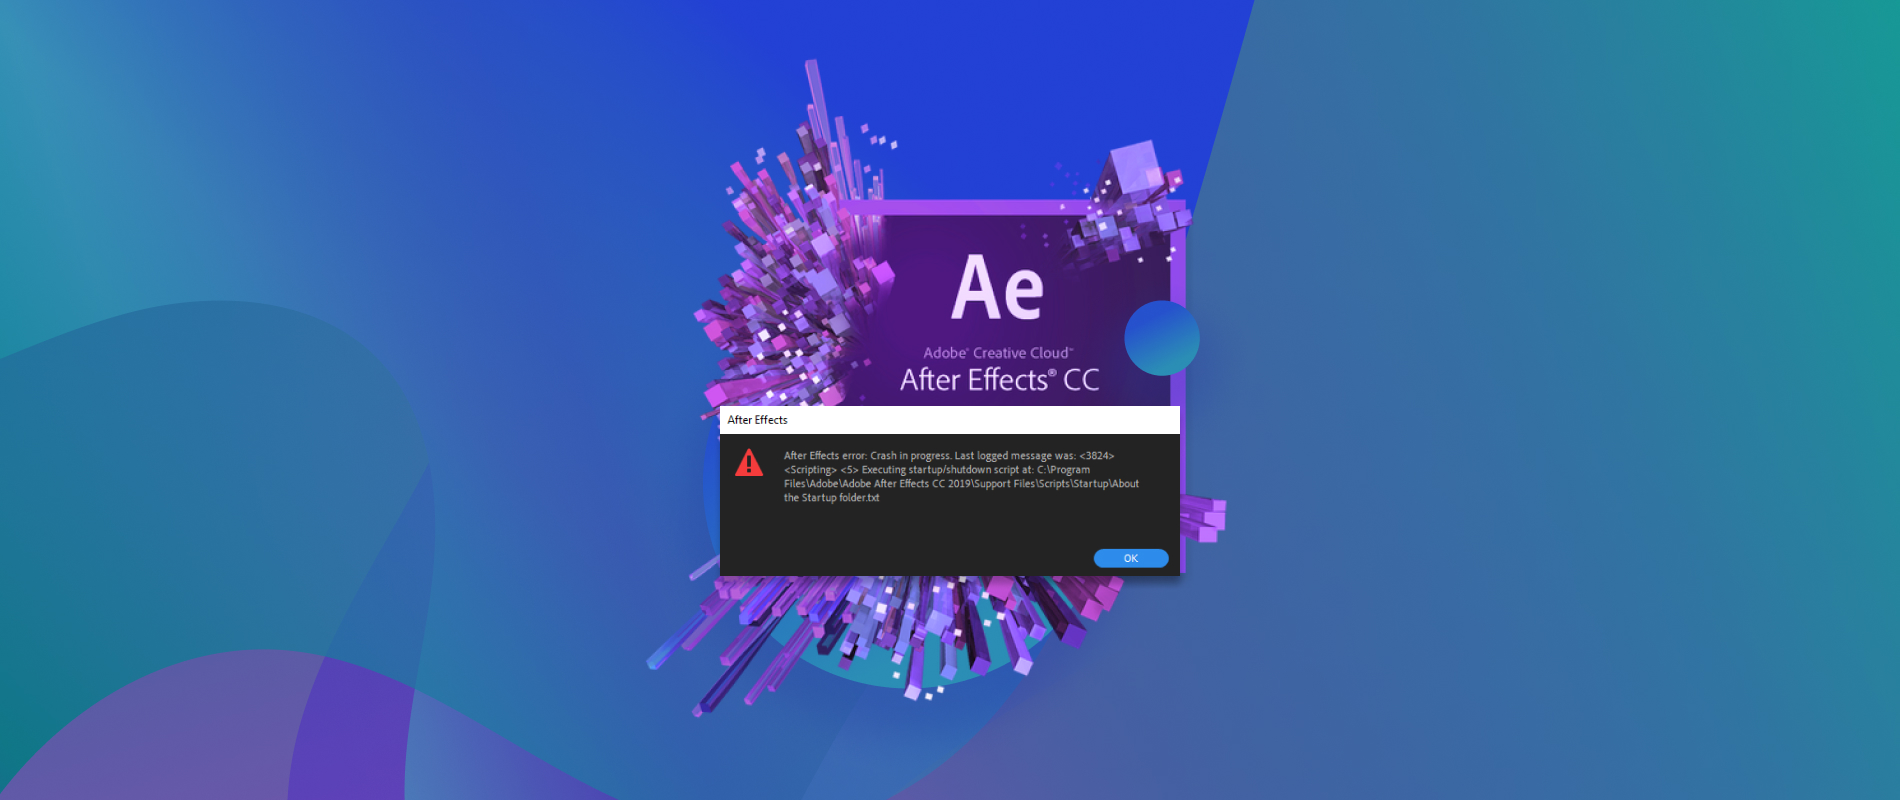 What should I do if Adobe Premiere Pro crashes and I didn't save my project? You can try recovering unsaved projects by going to "File" > "Recover Unsaved Projects". If that doesn't work, there are third-party recovery software options available.
How do I find crash logs in Adobe Premiere Pro? On a Mac, go to "Applications" > "Utilities" > "Console" and look for the "Adobe" folder. On a PC, go to "Event Viewer" and look for the "Adobe" folder. Check the logs for any errors or information that ma